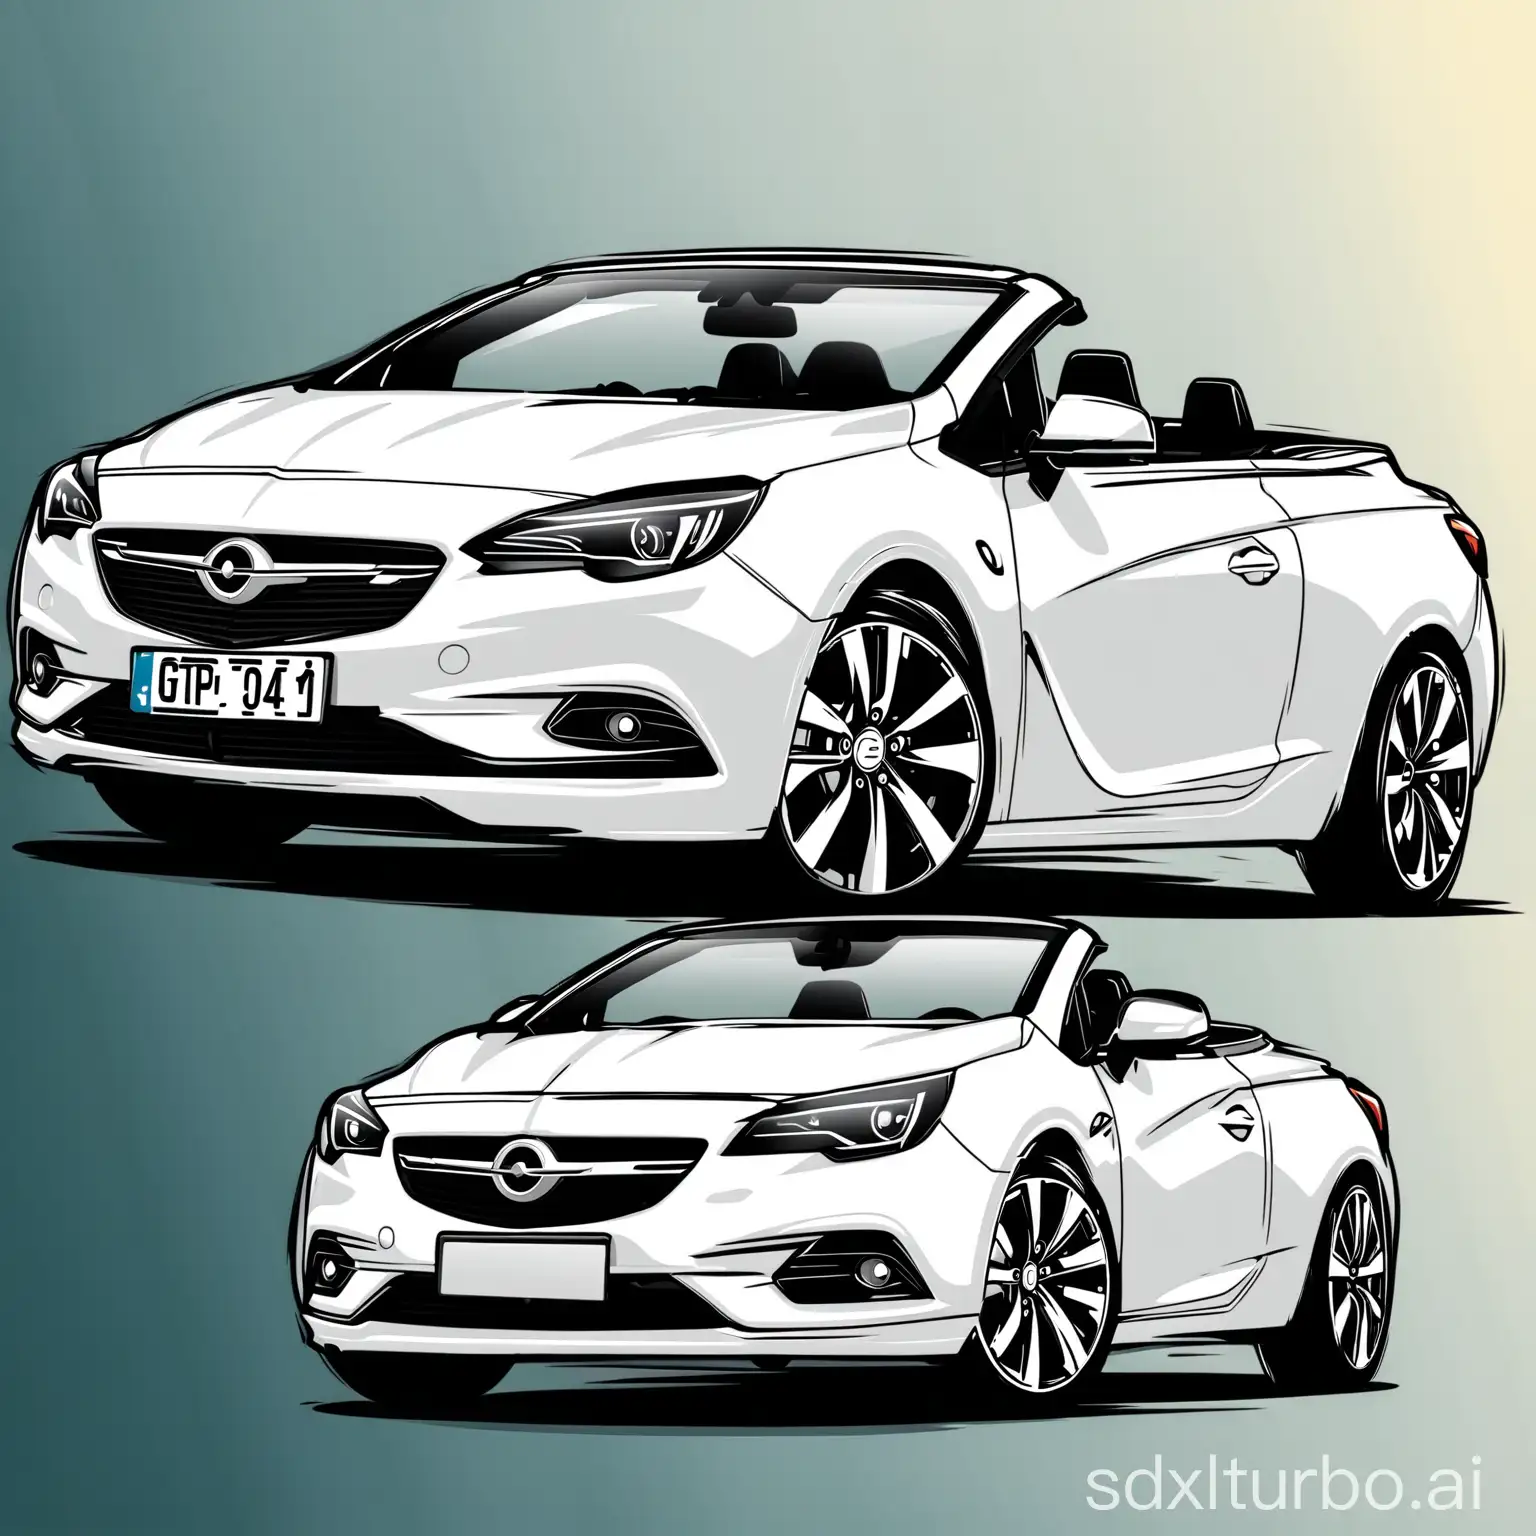 Opel-Cascada-Mineral-White-Car-with-GT-OP14-License-Plate-Vector-Illustration